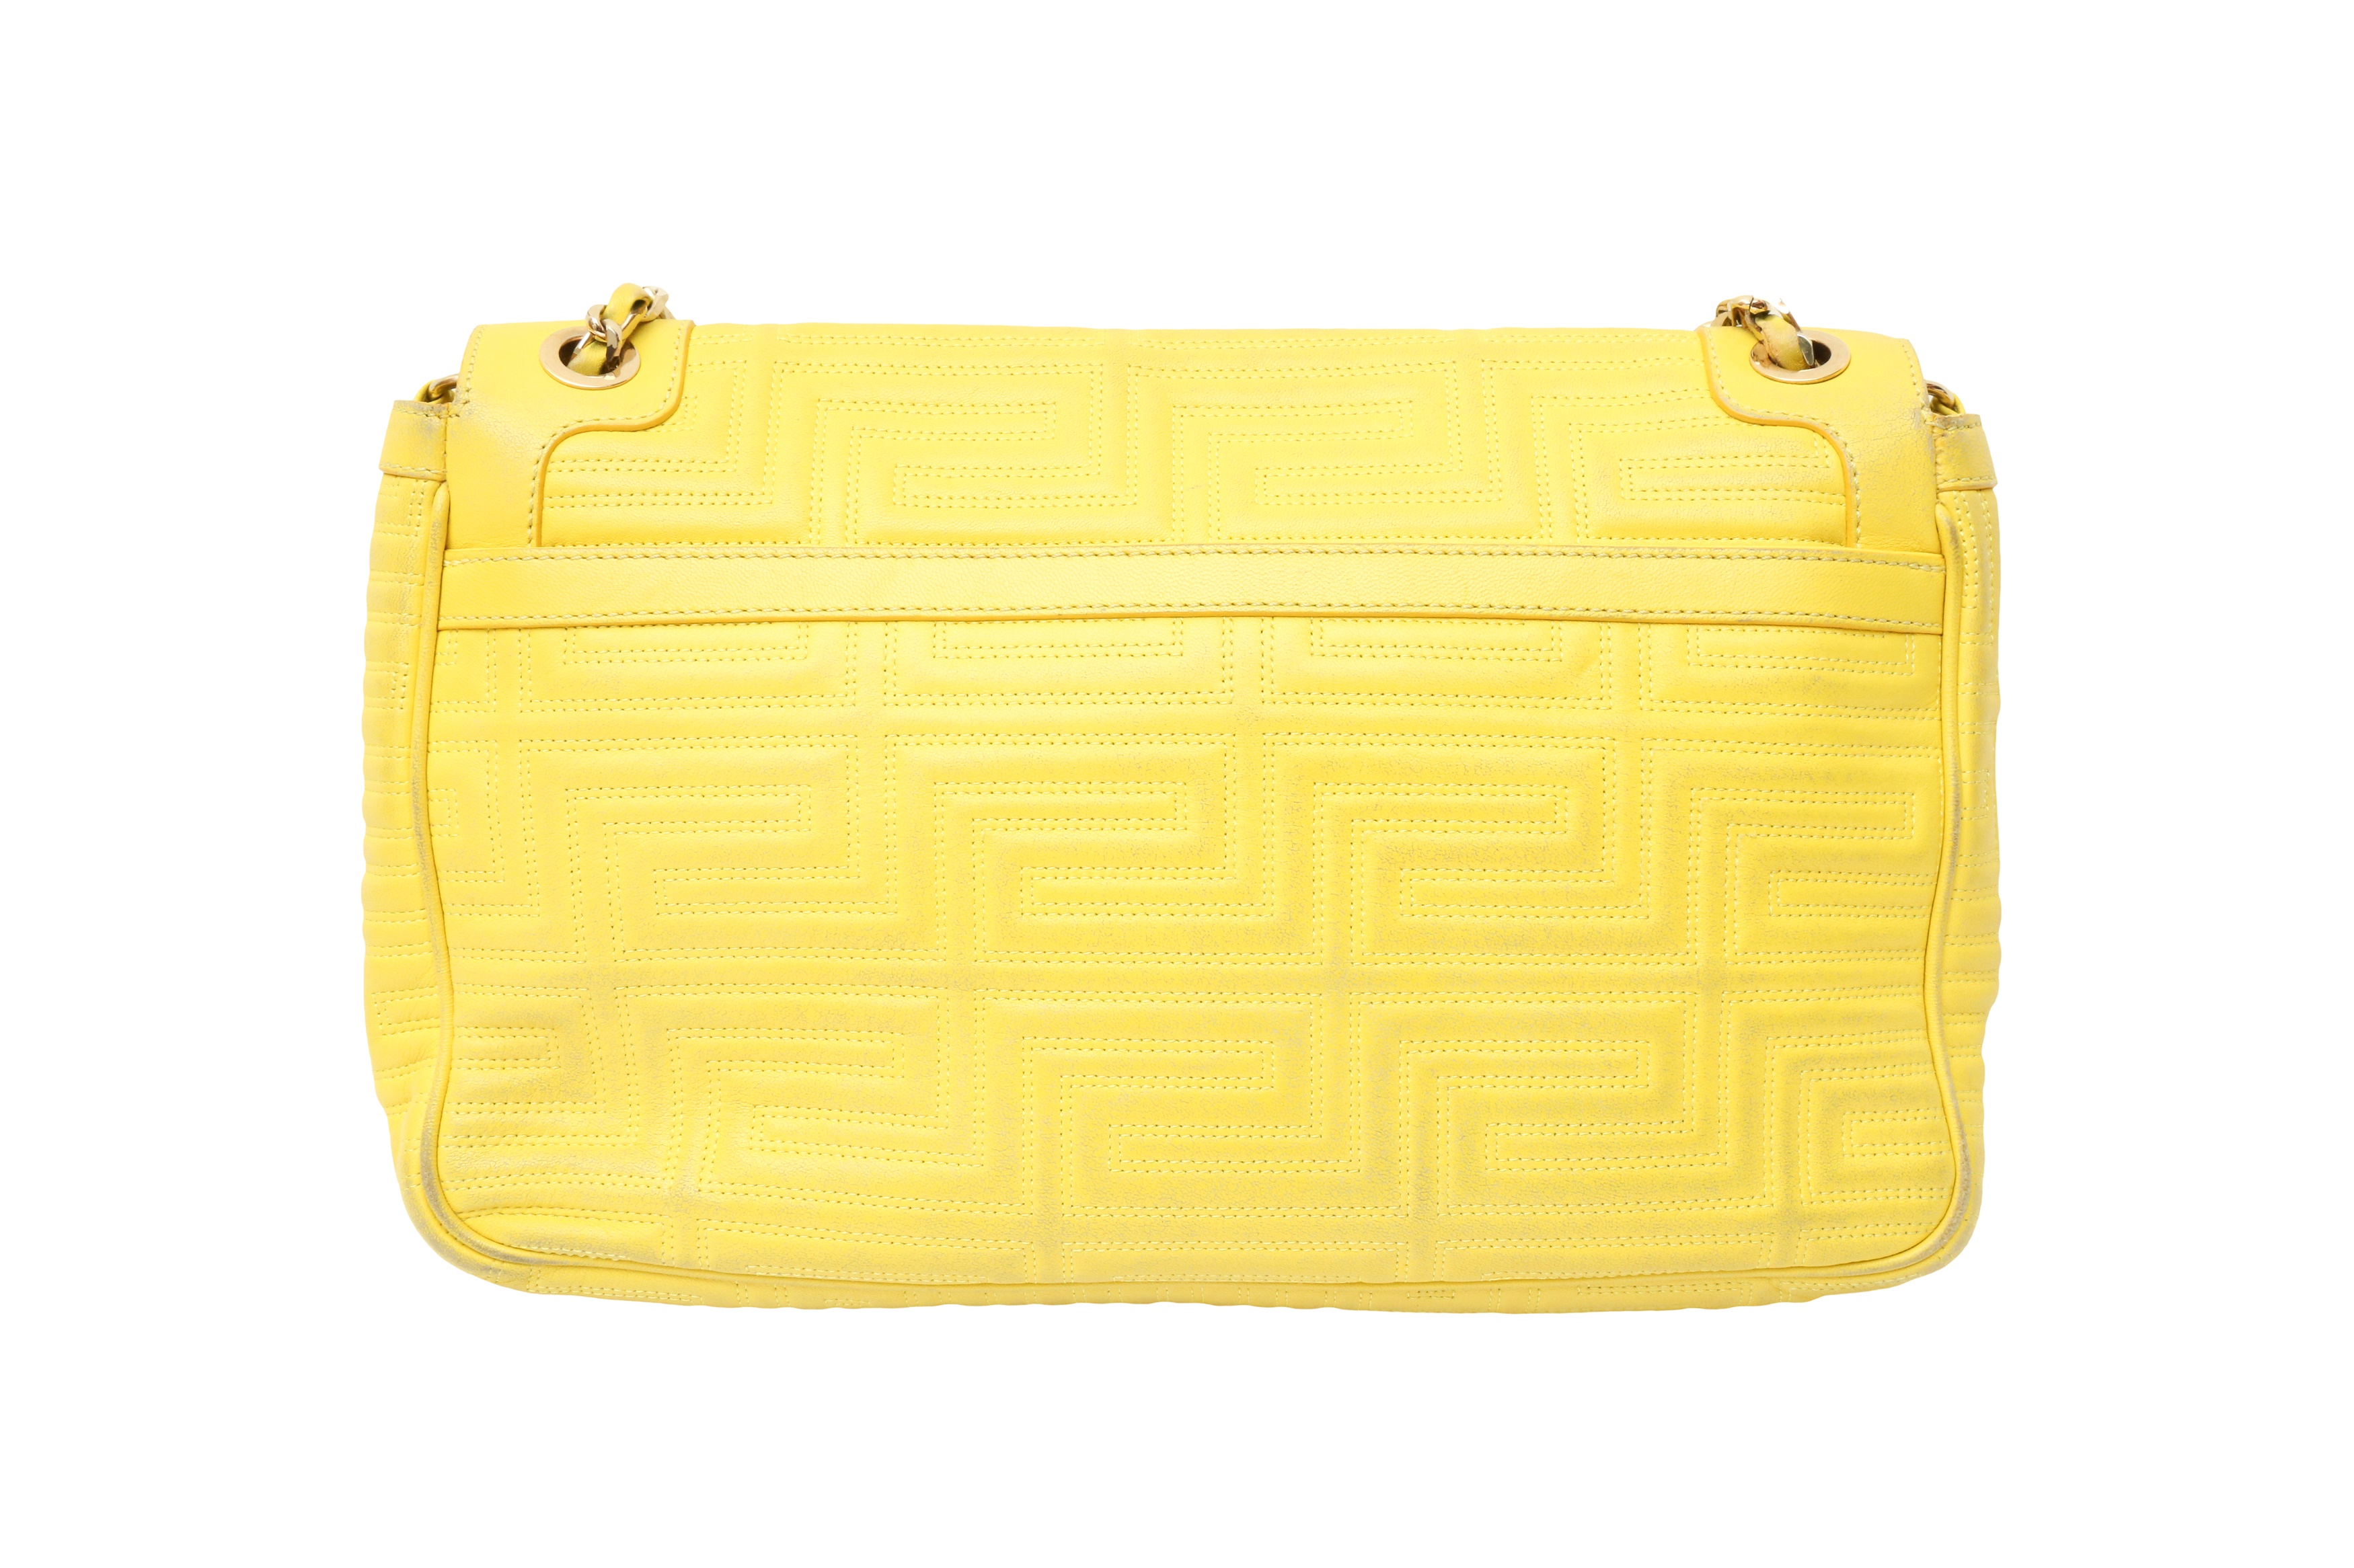 Gianni Versace Couture Yellow Chain Flap Bag - Image 3 of 6